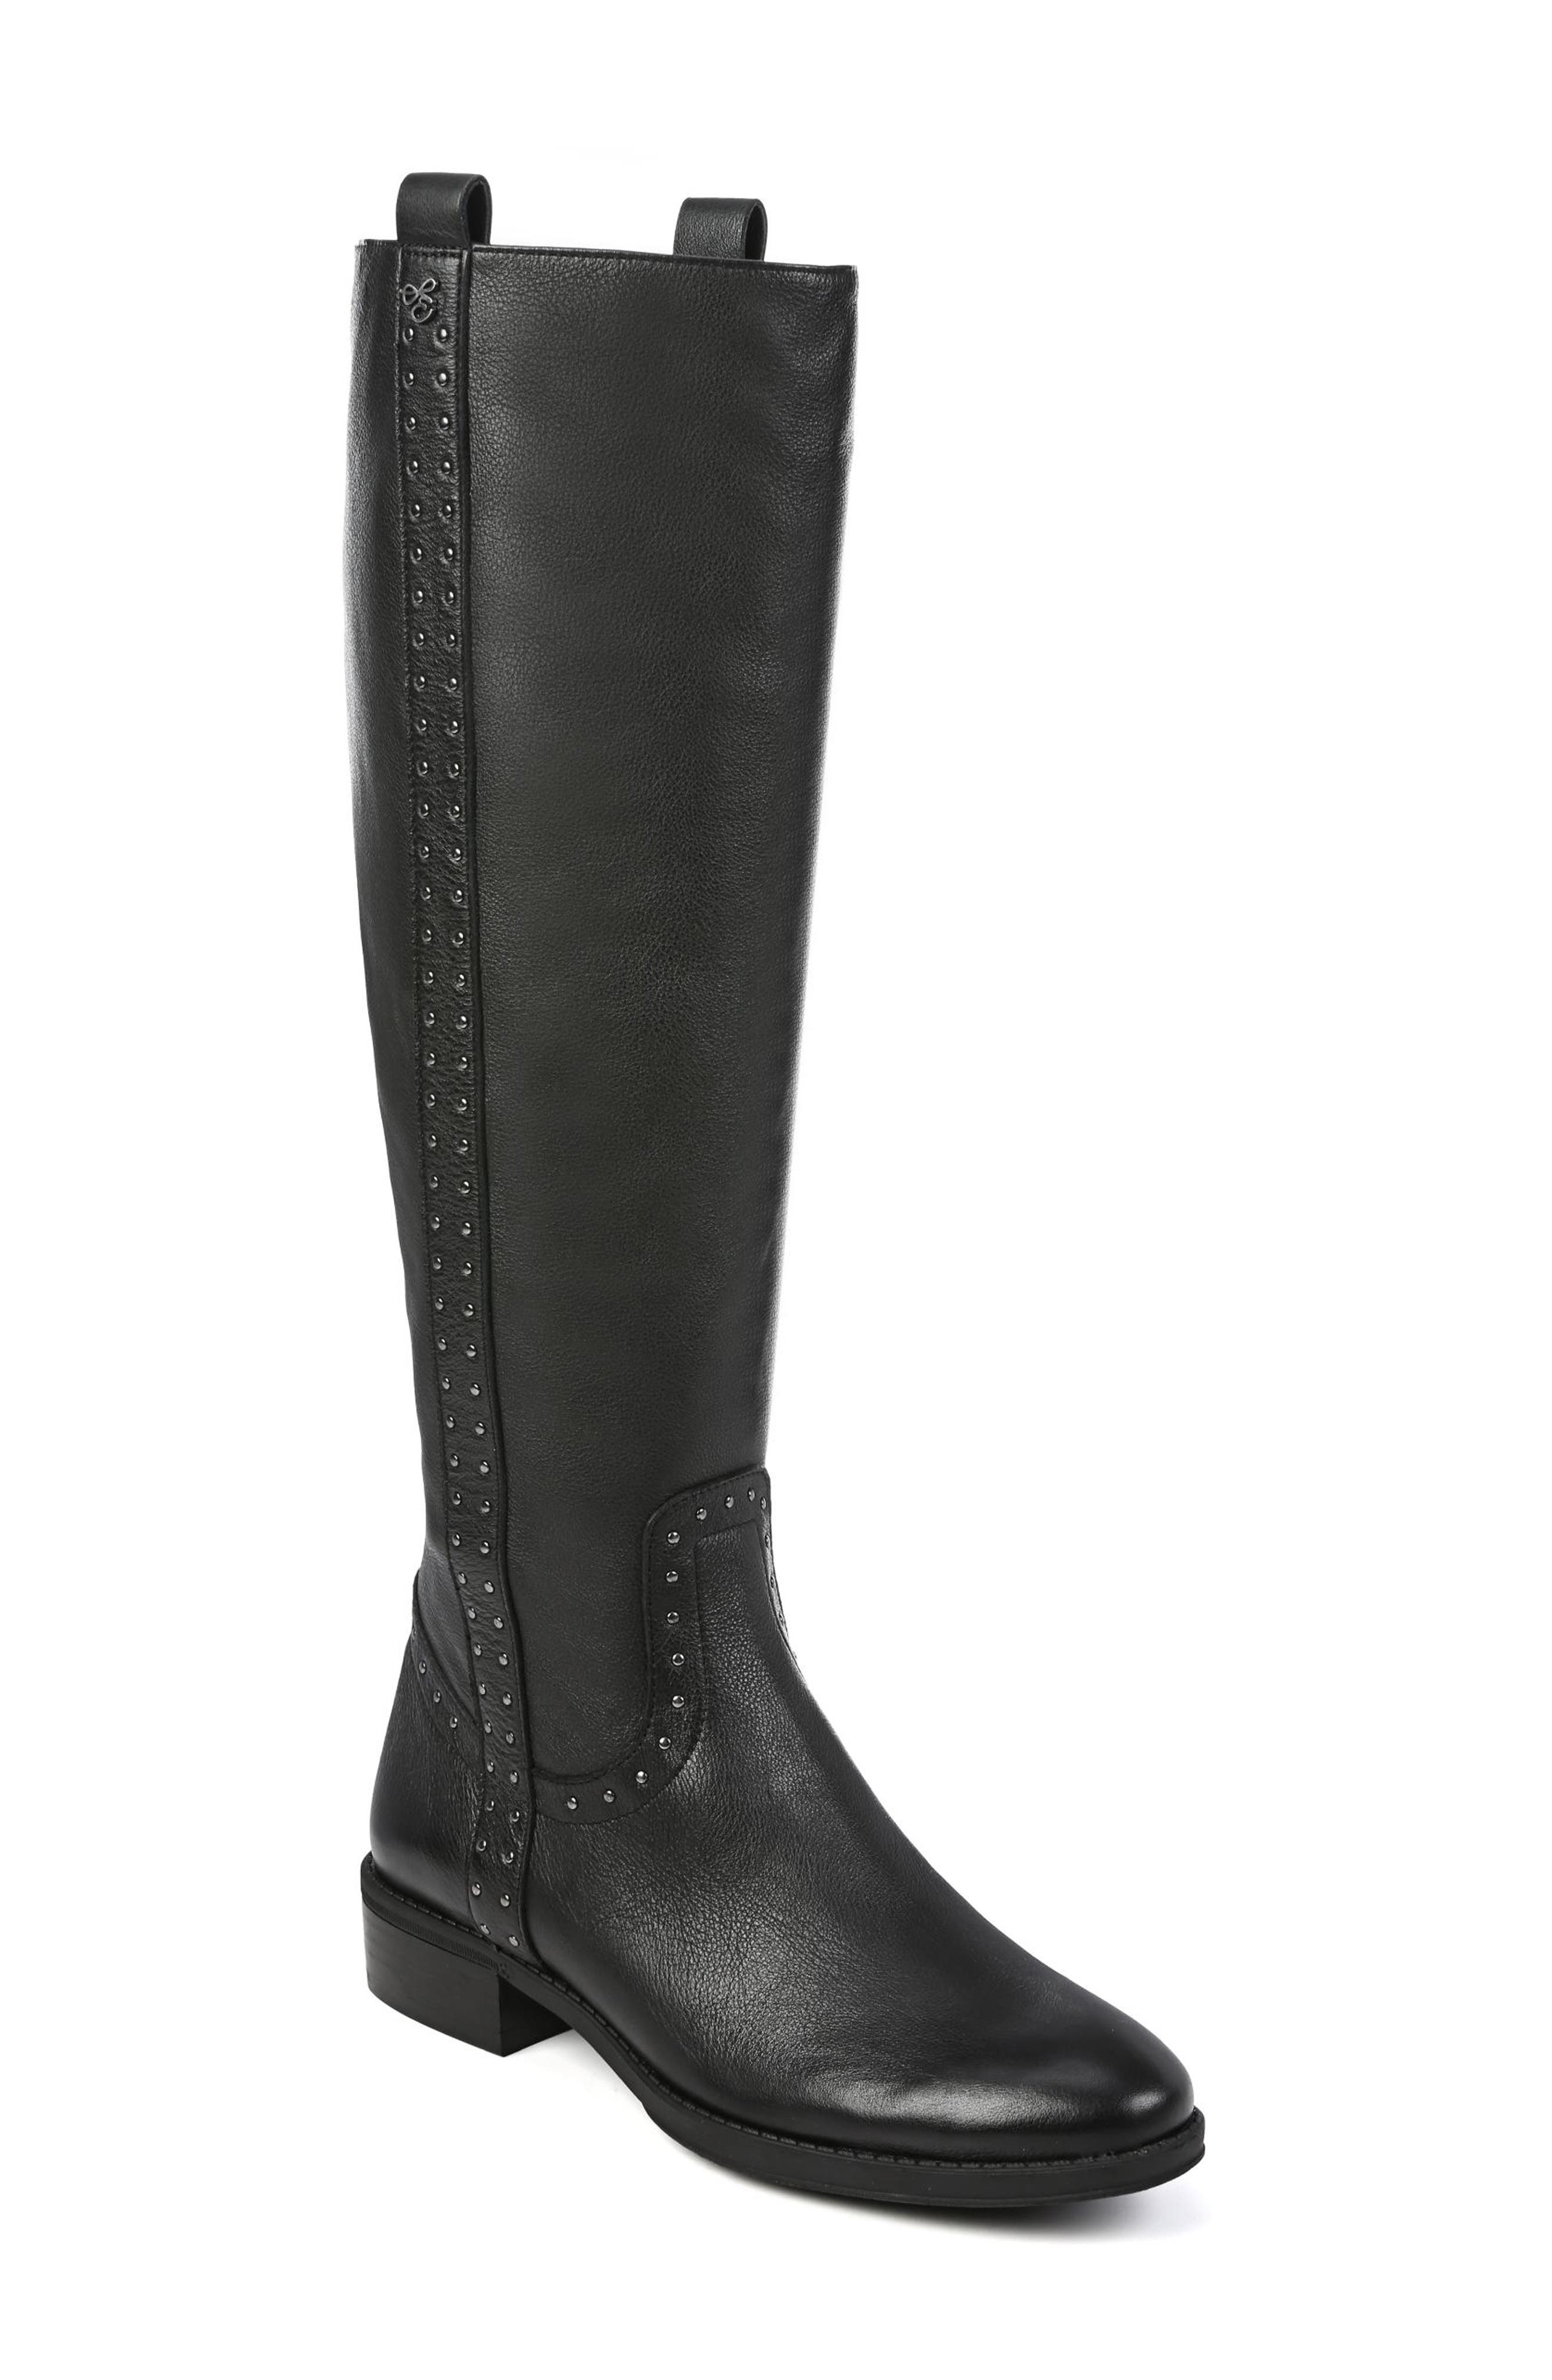 nordstrom rack riding boots